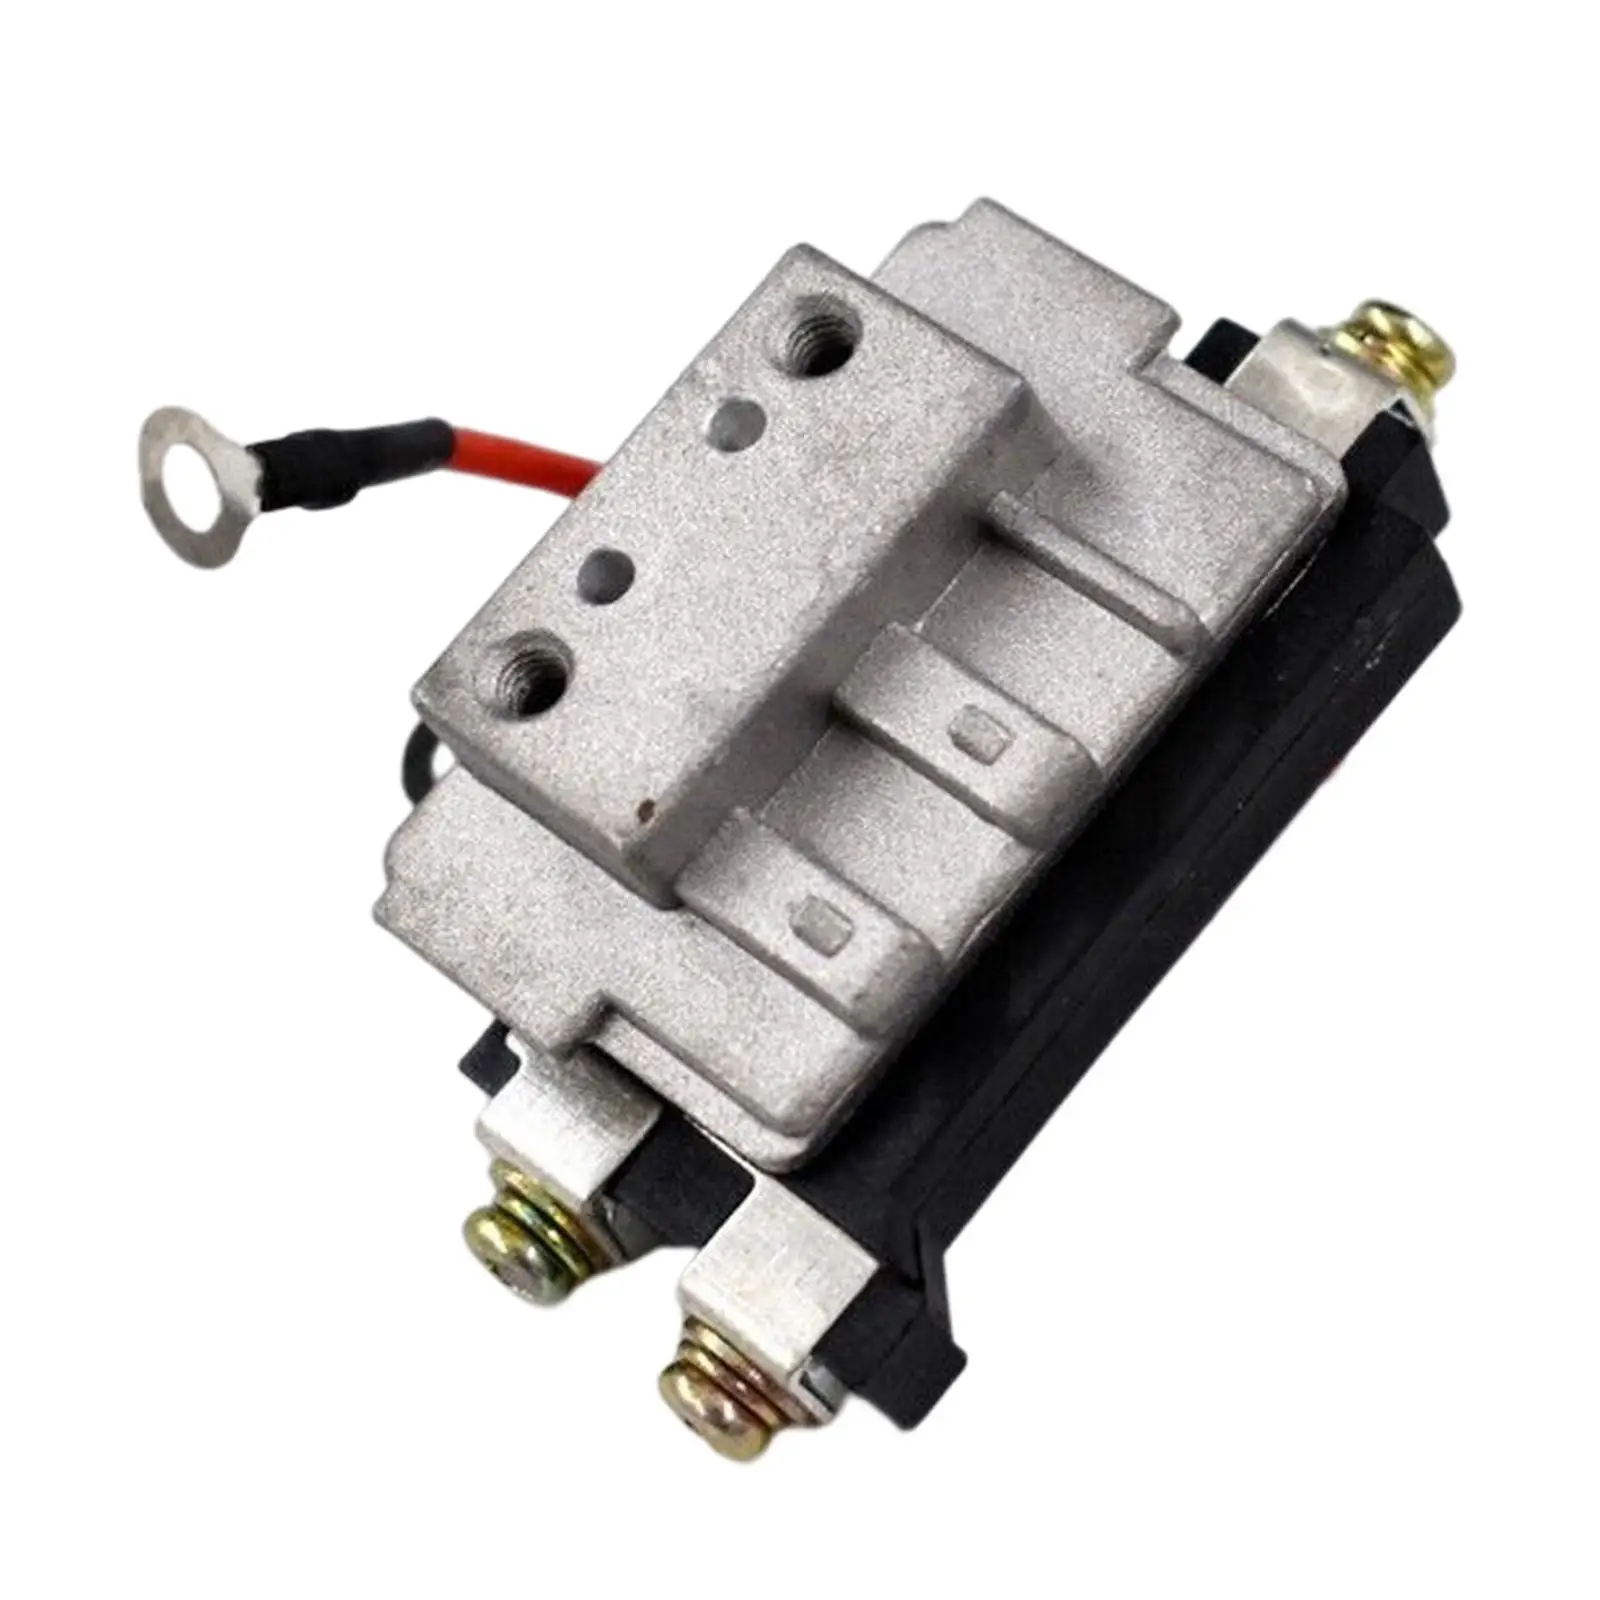 89620-12440 Ignition Module Direct Replaces Accessory Easy To Install